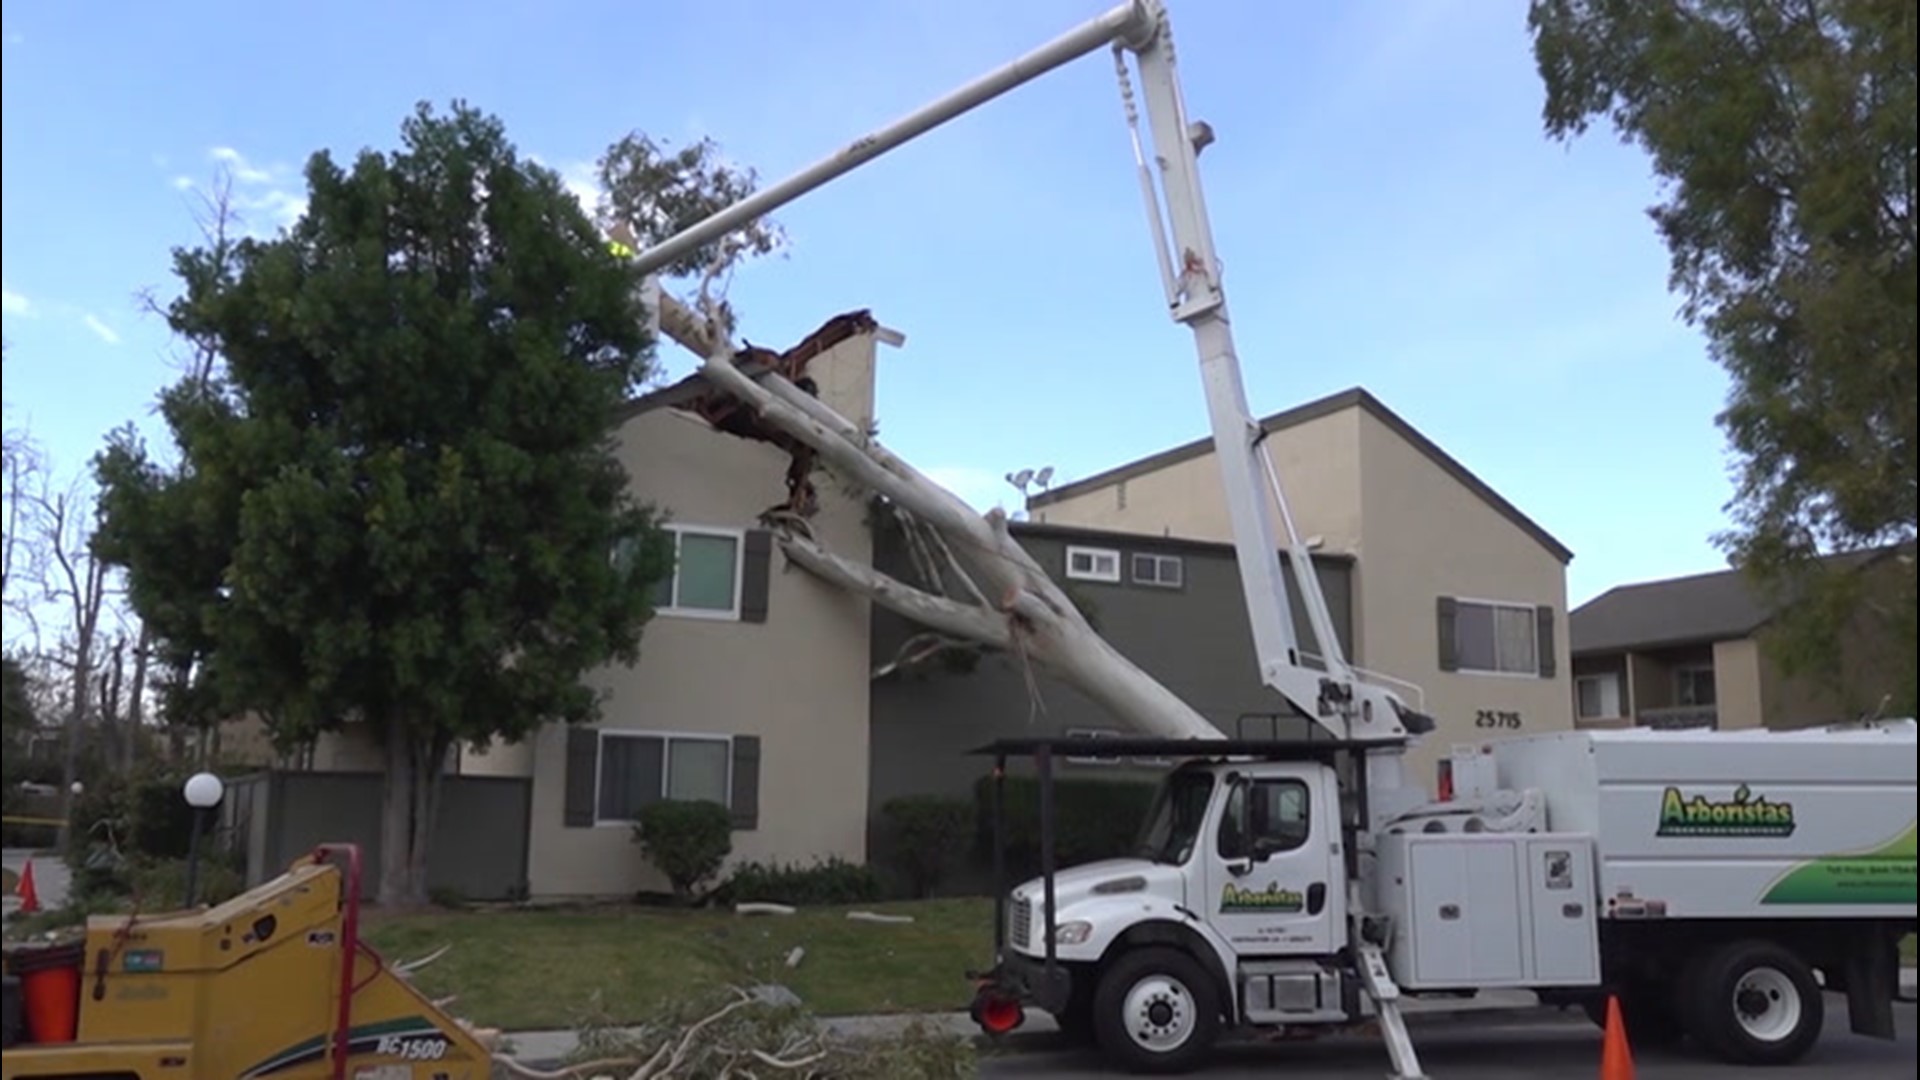 Powerful winds that blew through Southern California on Jan. 19 are blamed for trucks tipping over, trees falling over and fueling new fires that sparked. AccuWeather's Bill Wadell had the story.